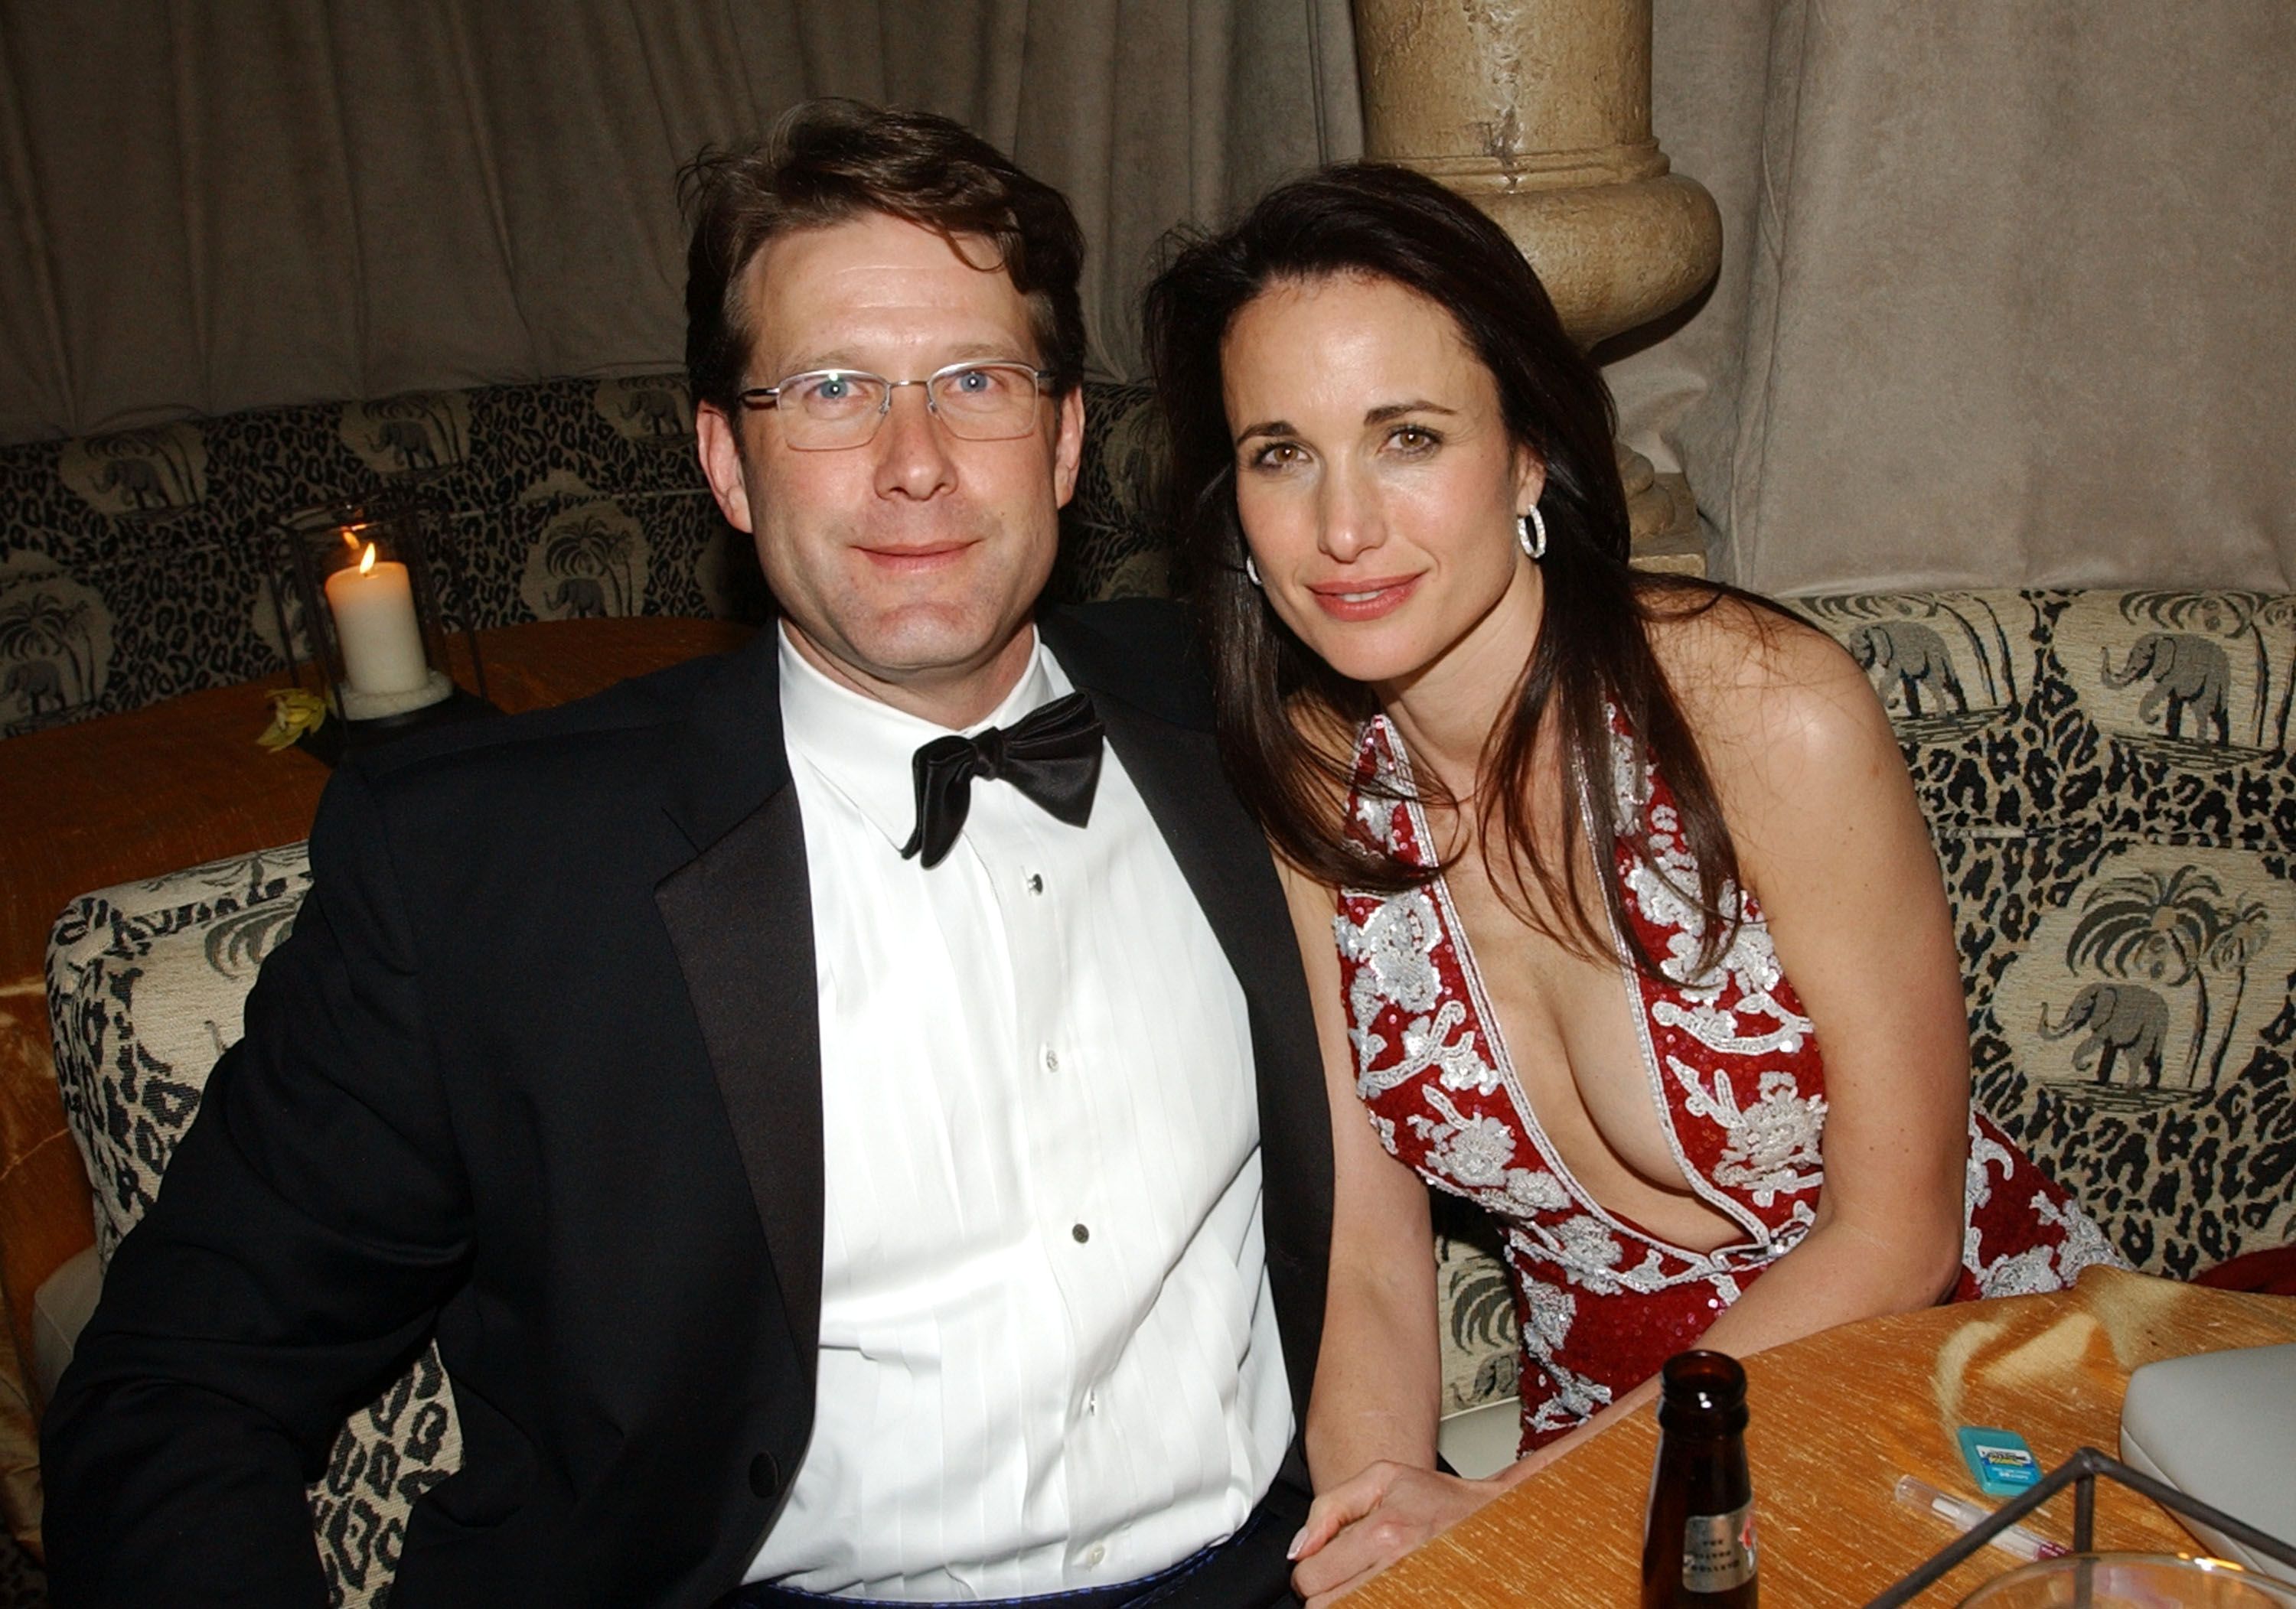 Andie MacDowell and Rhett DeCamp Hartzog during the HBO after-party at the Golden Globe Awards in Beverly Hills, California January 20, 2002. | Source: Getty Images